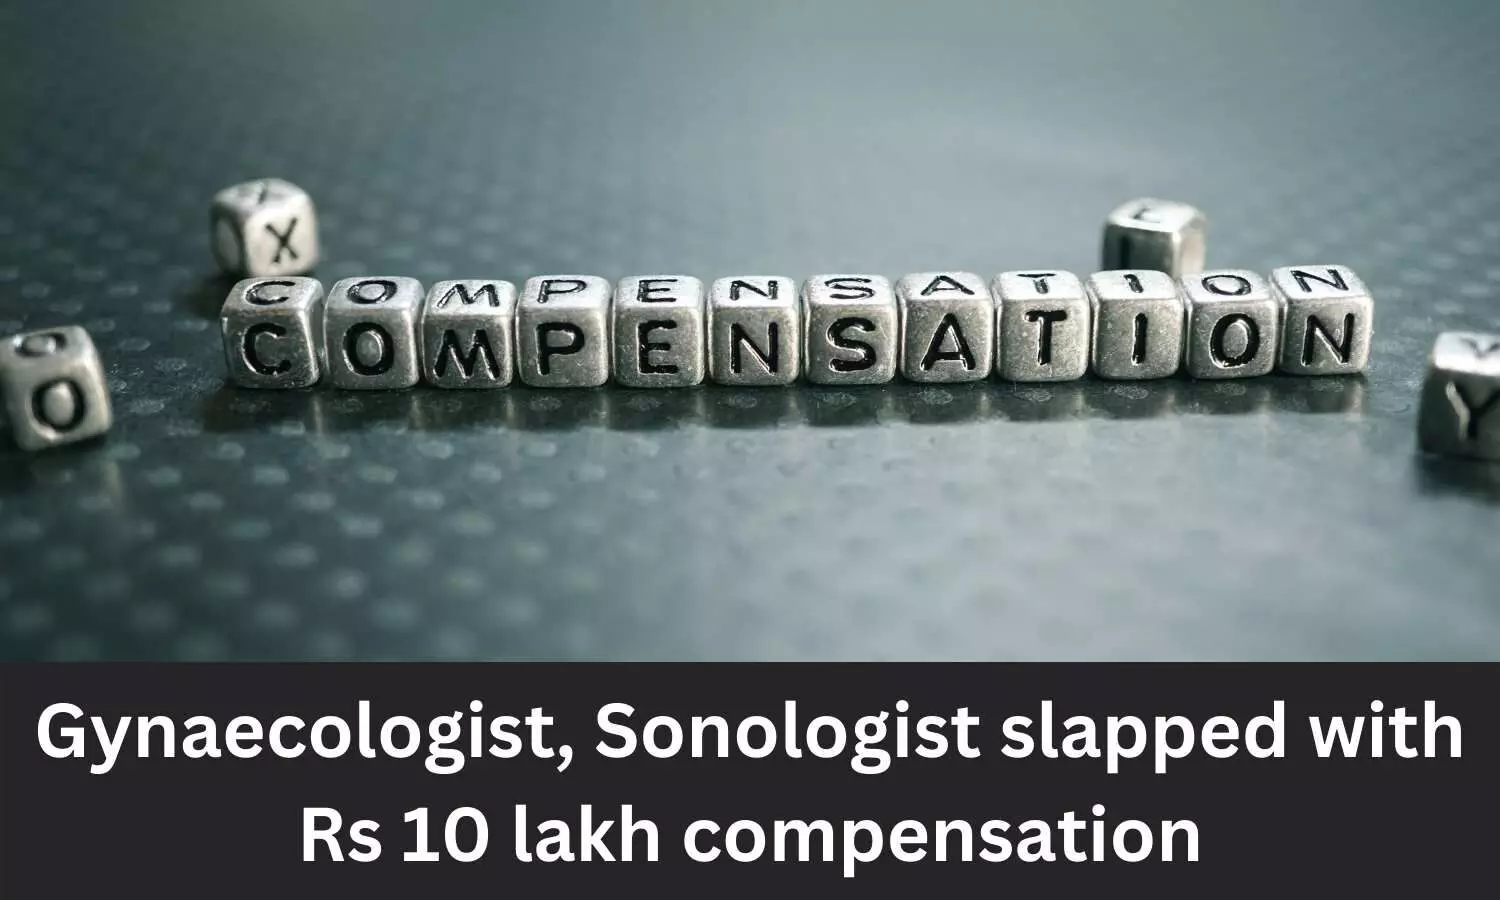 Infant born without hand, leg: Gynaecologist, Sonologist slapped with Rs 10 lakh compensation